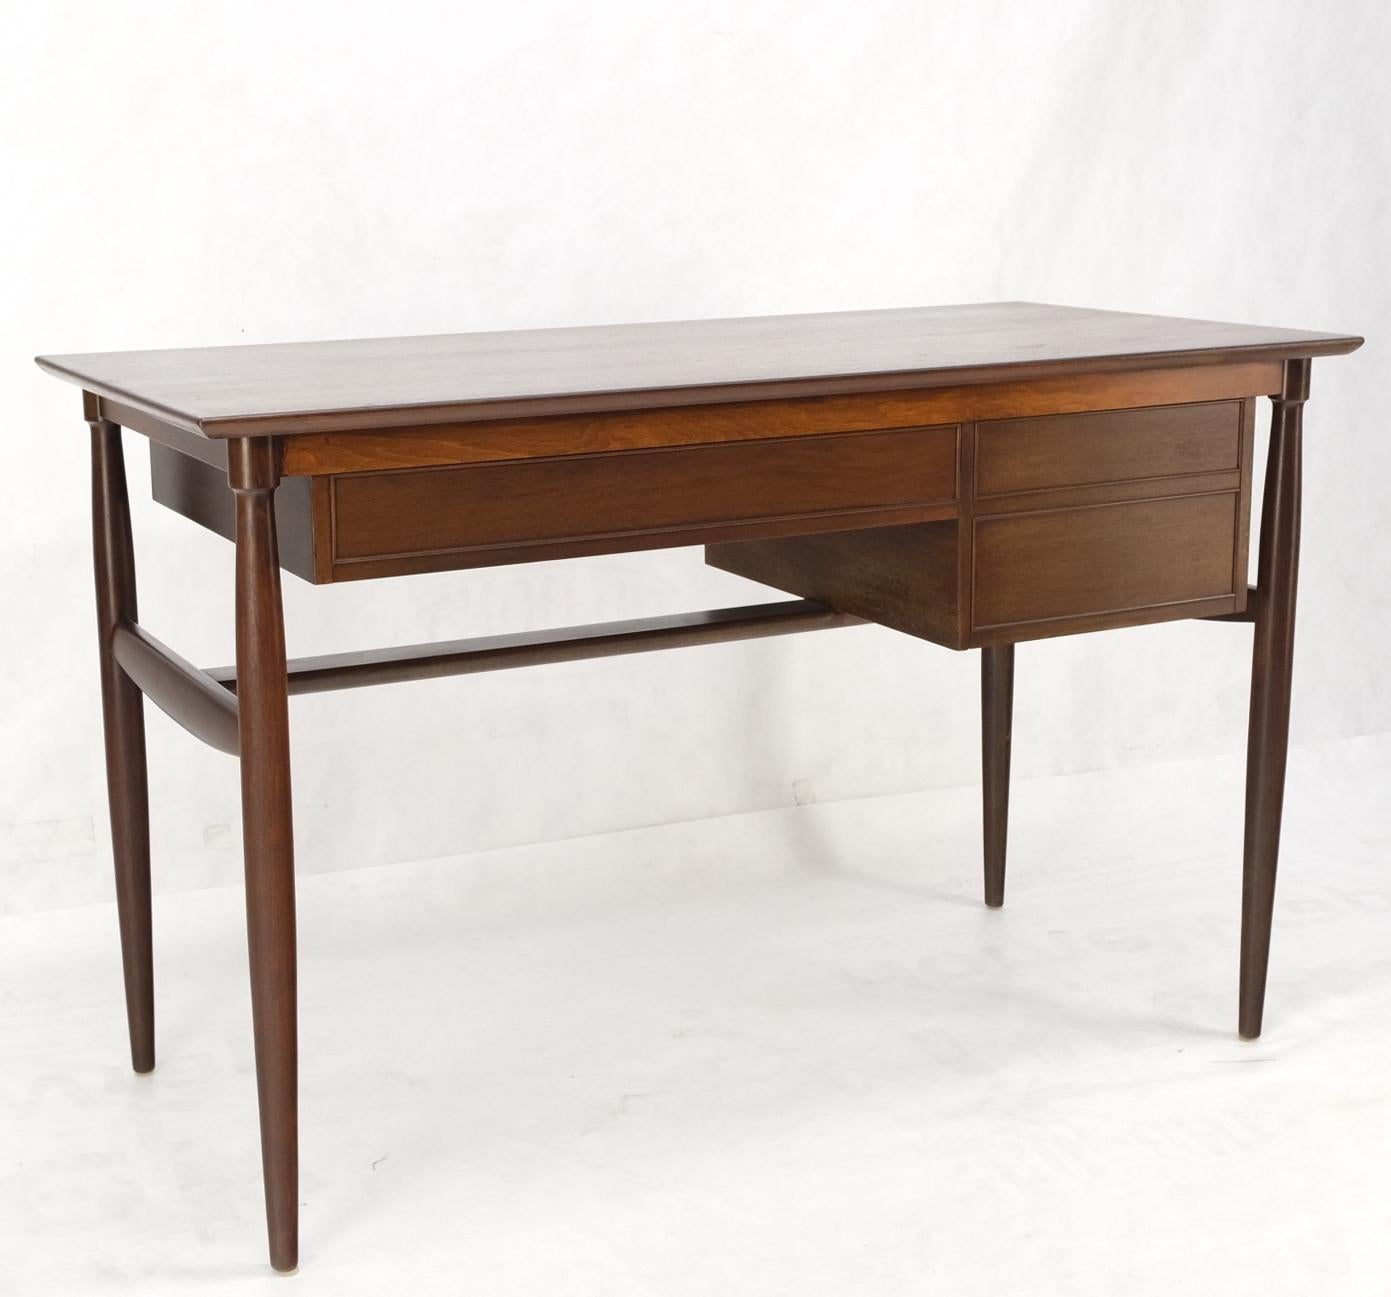 Exposed Dowel Shape Legs Floating Top 3 Drawers Walnut Desk Table Console Mint 5